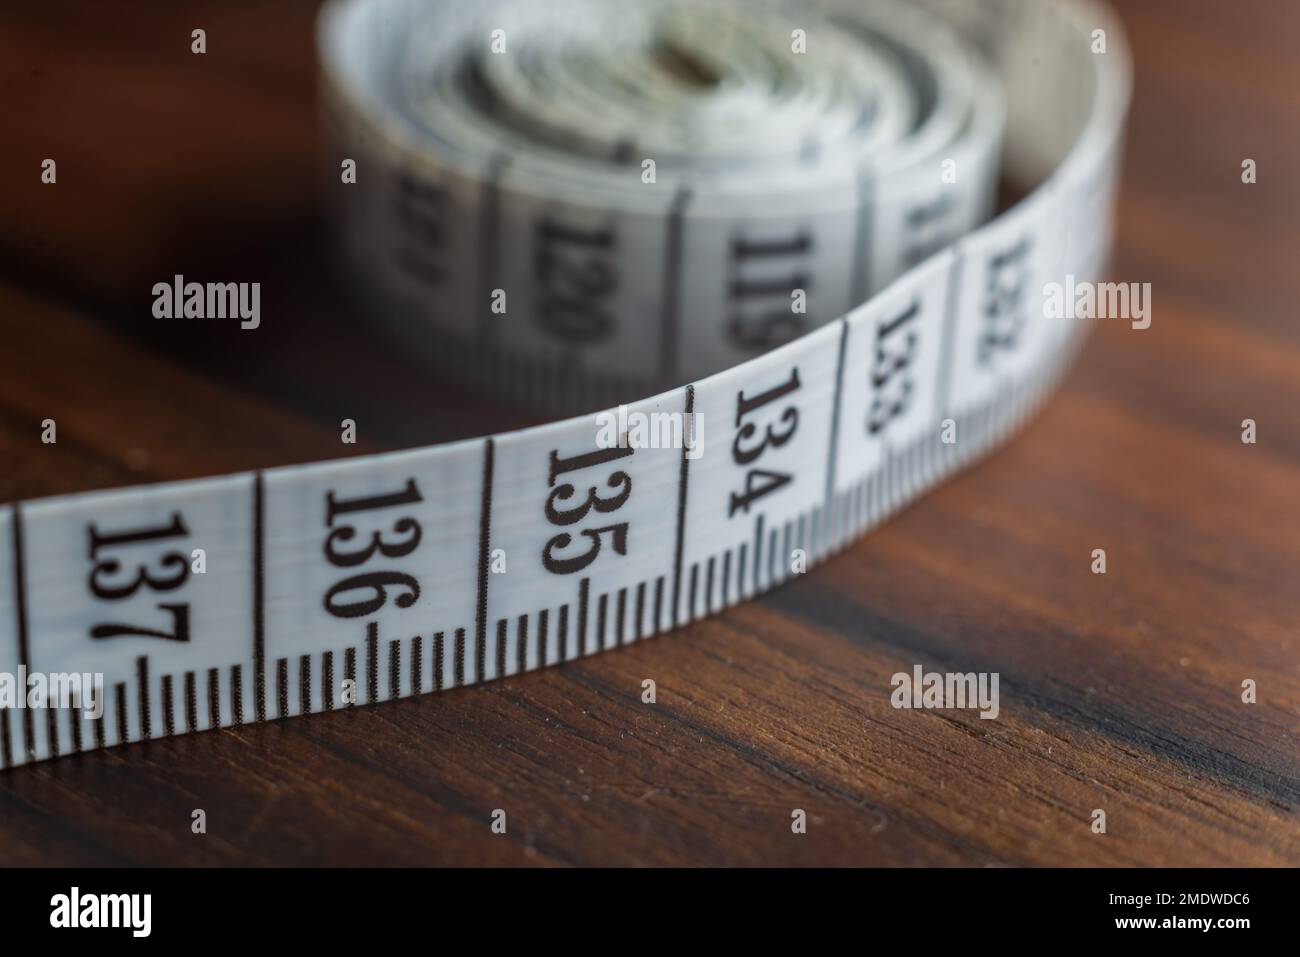 https://c8.alamy.com/comp/2MDWDC6/close-up-tailor-measuring-tape-on-wooden-table-background-white-measuring-tape-shallow-depth-of-field-2MDWDC6.jpg